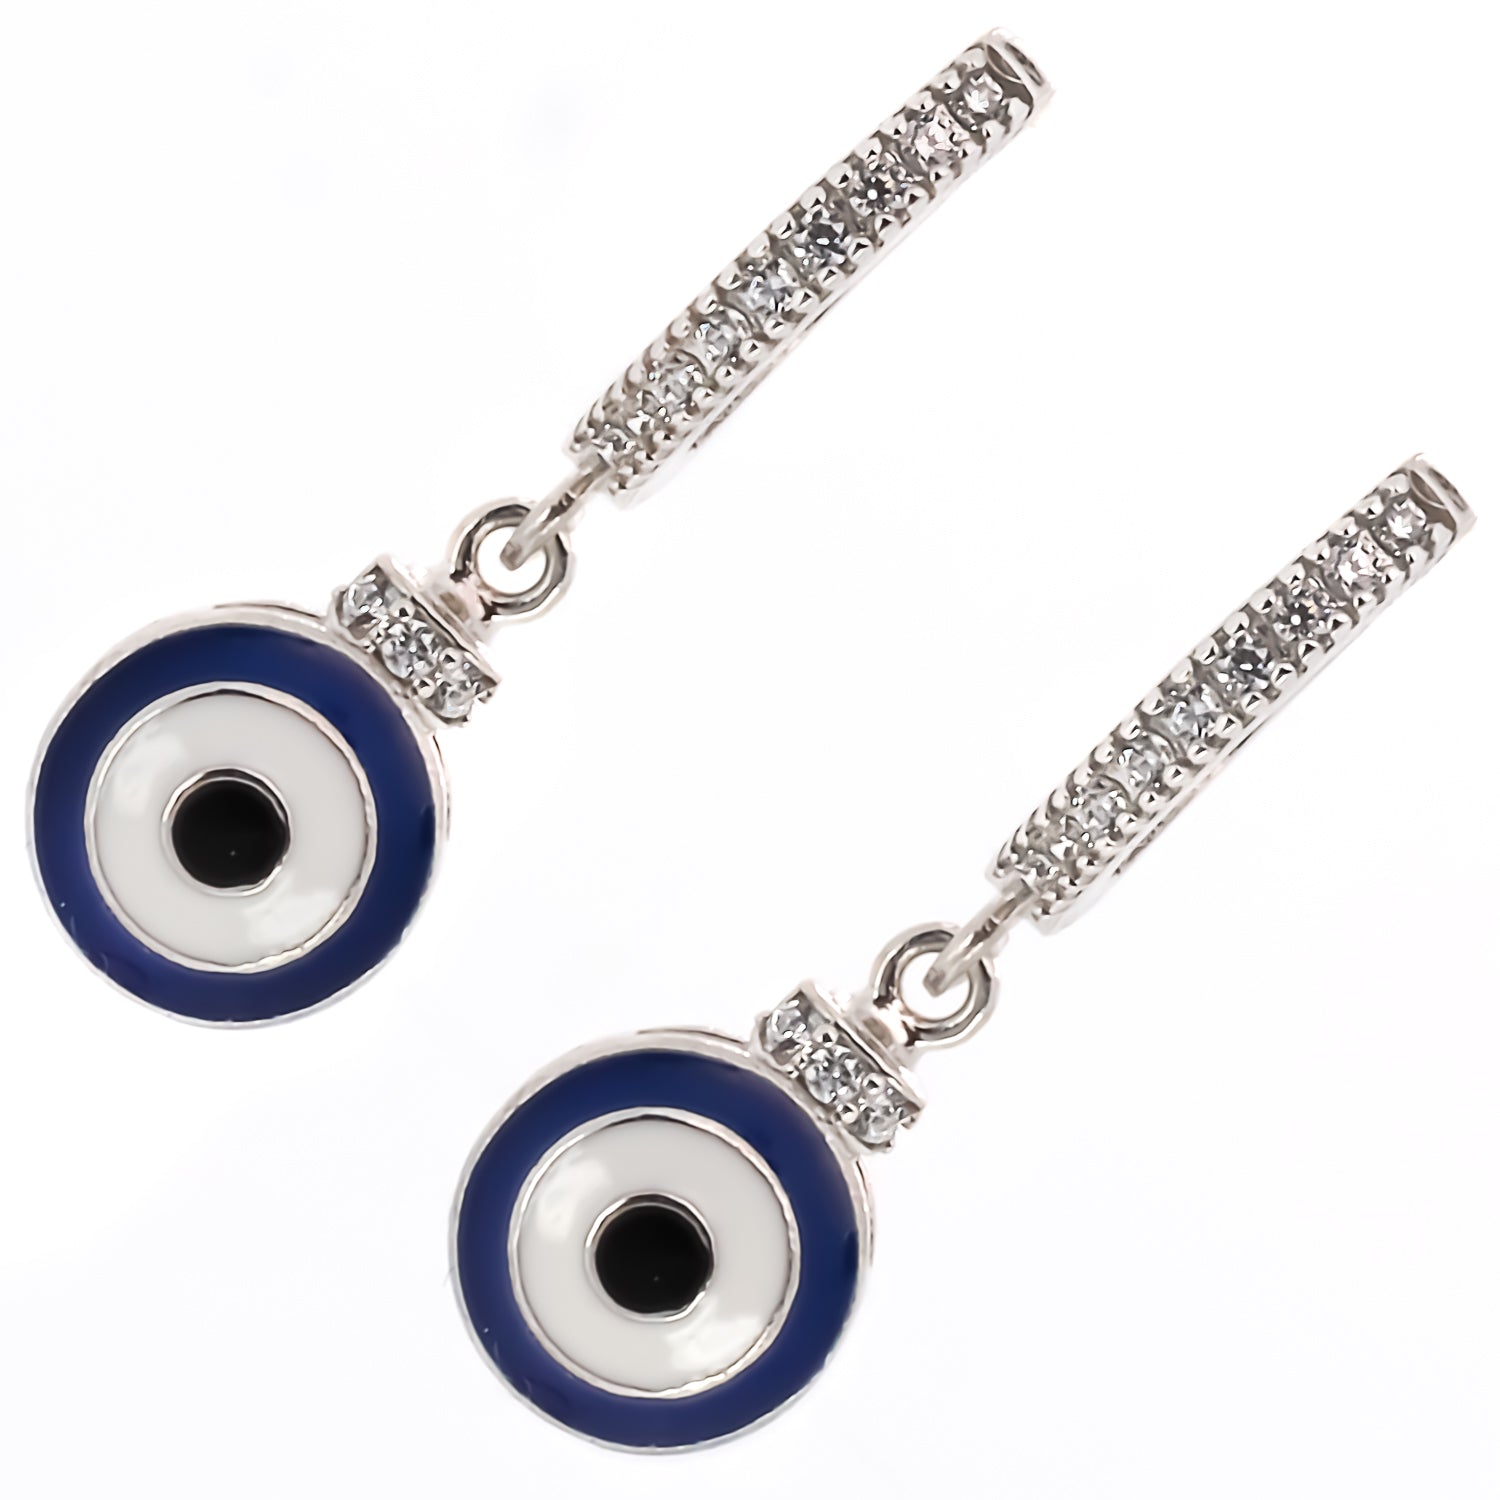 Dainty and elegant earrings adorned with blue enamel and zircon stones